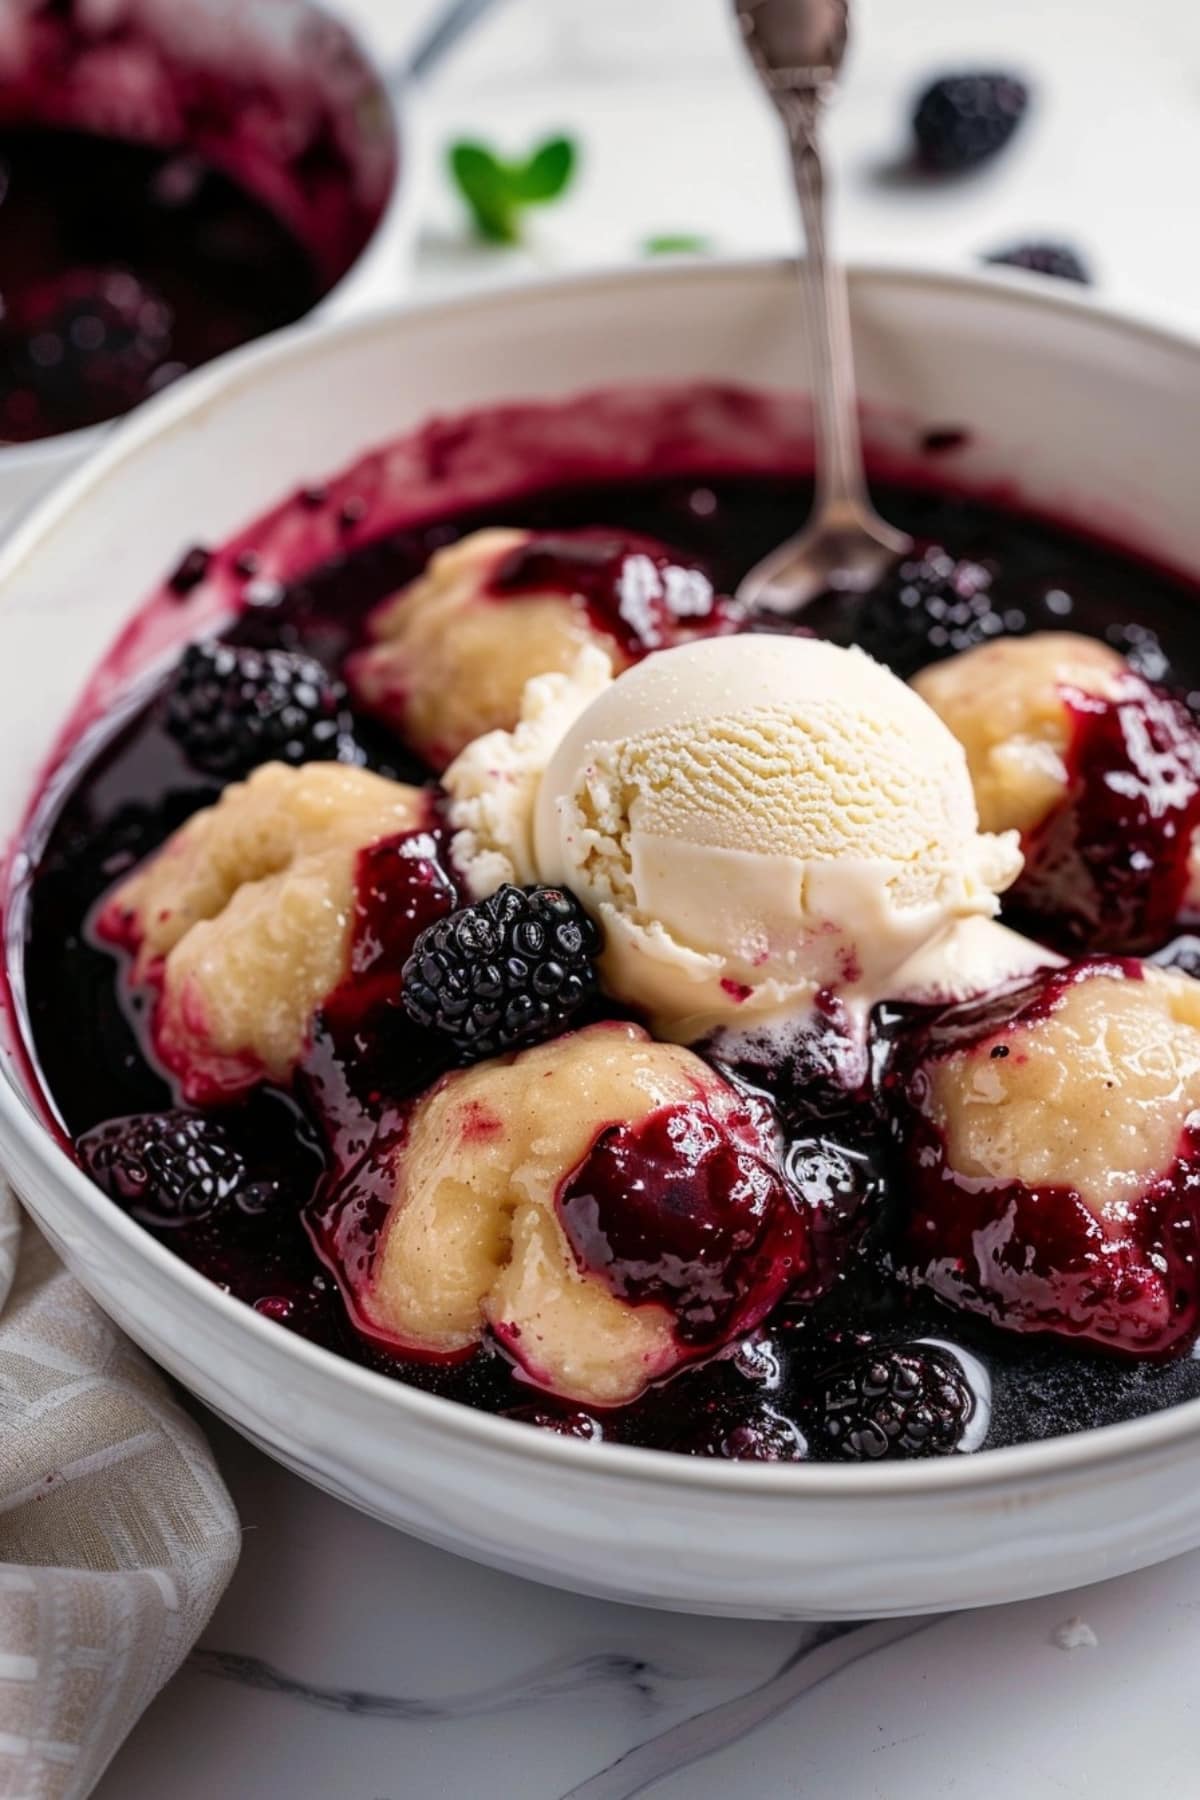 Blackberry dumpling with jamlike sauce served in a white bowl topped with vanilla ice cream.